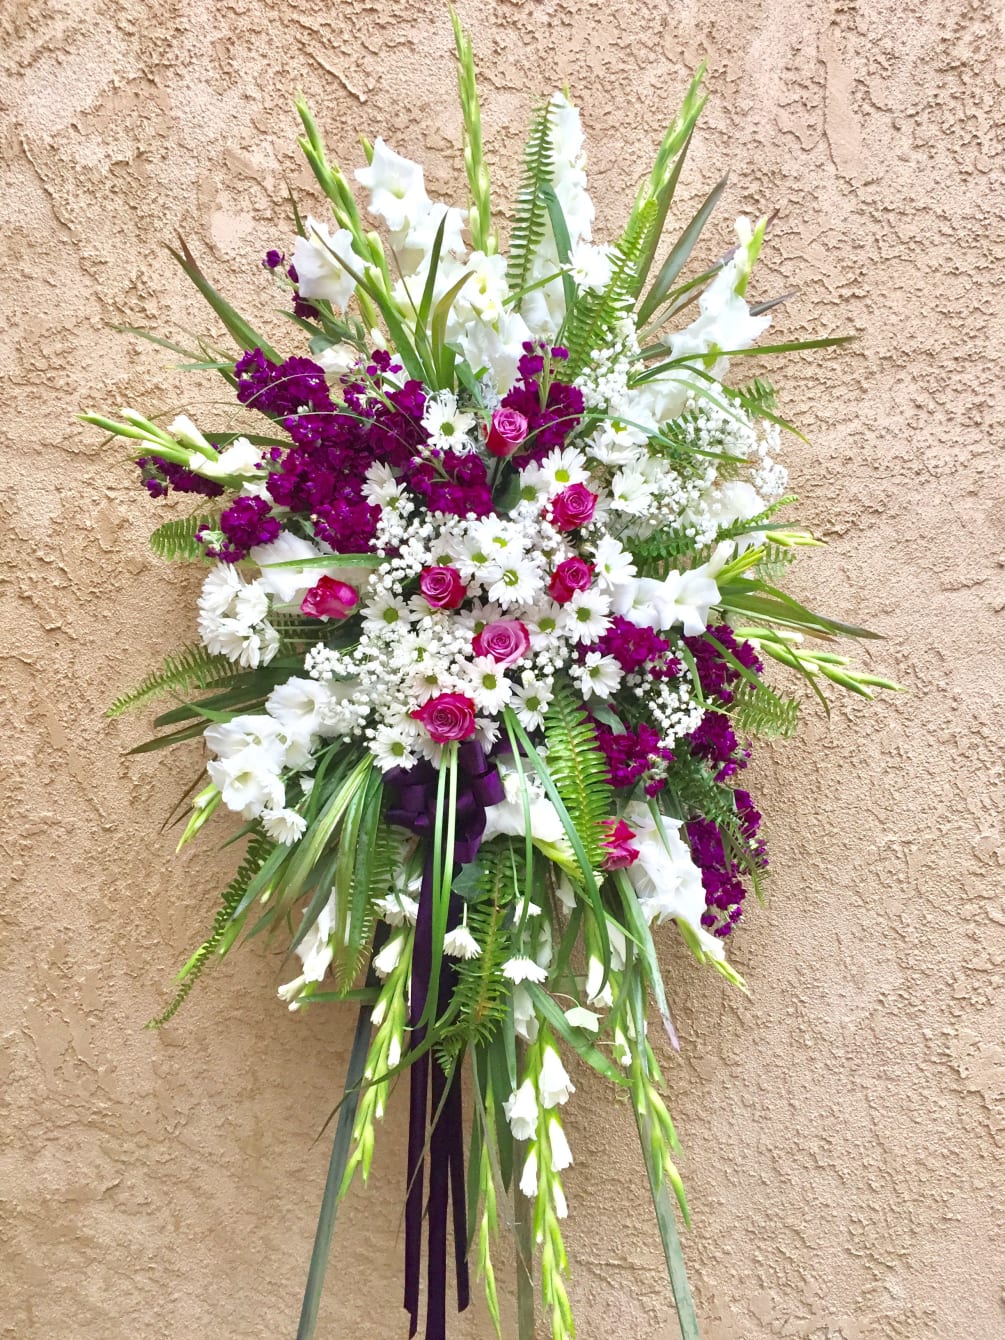 Funeral spray with purple and white fresh flowers